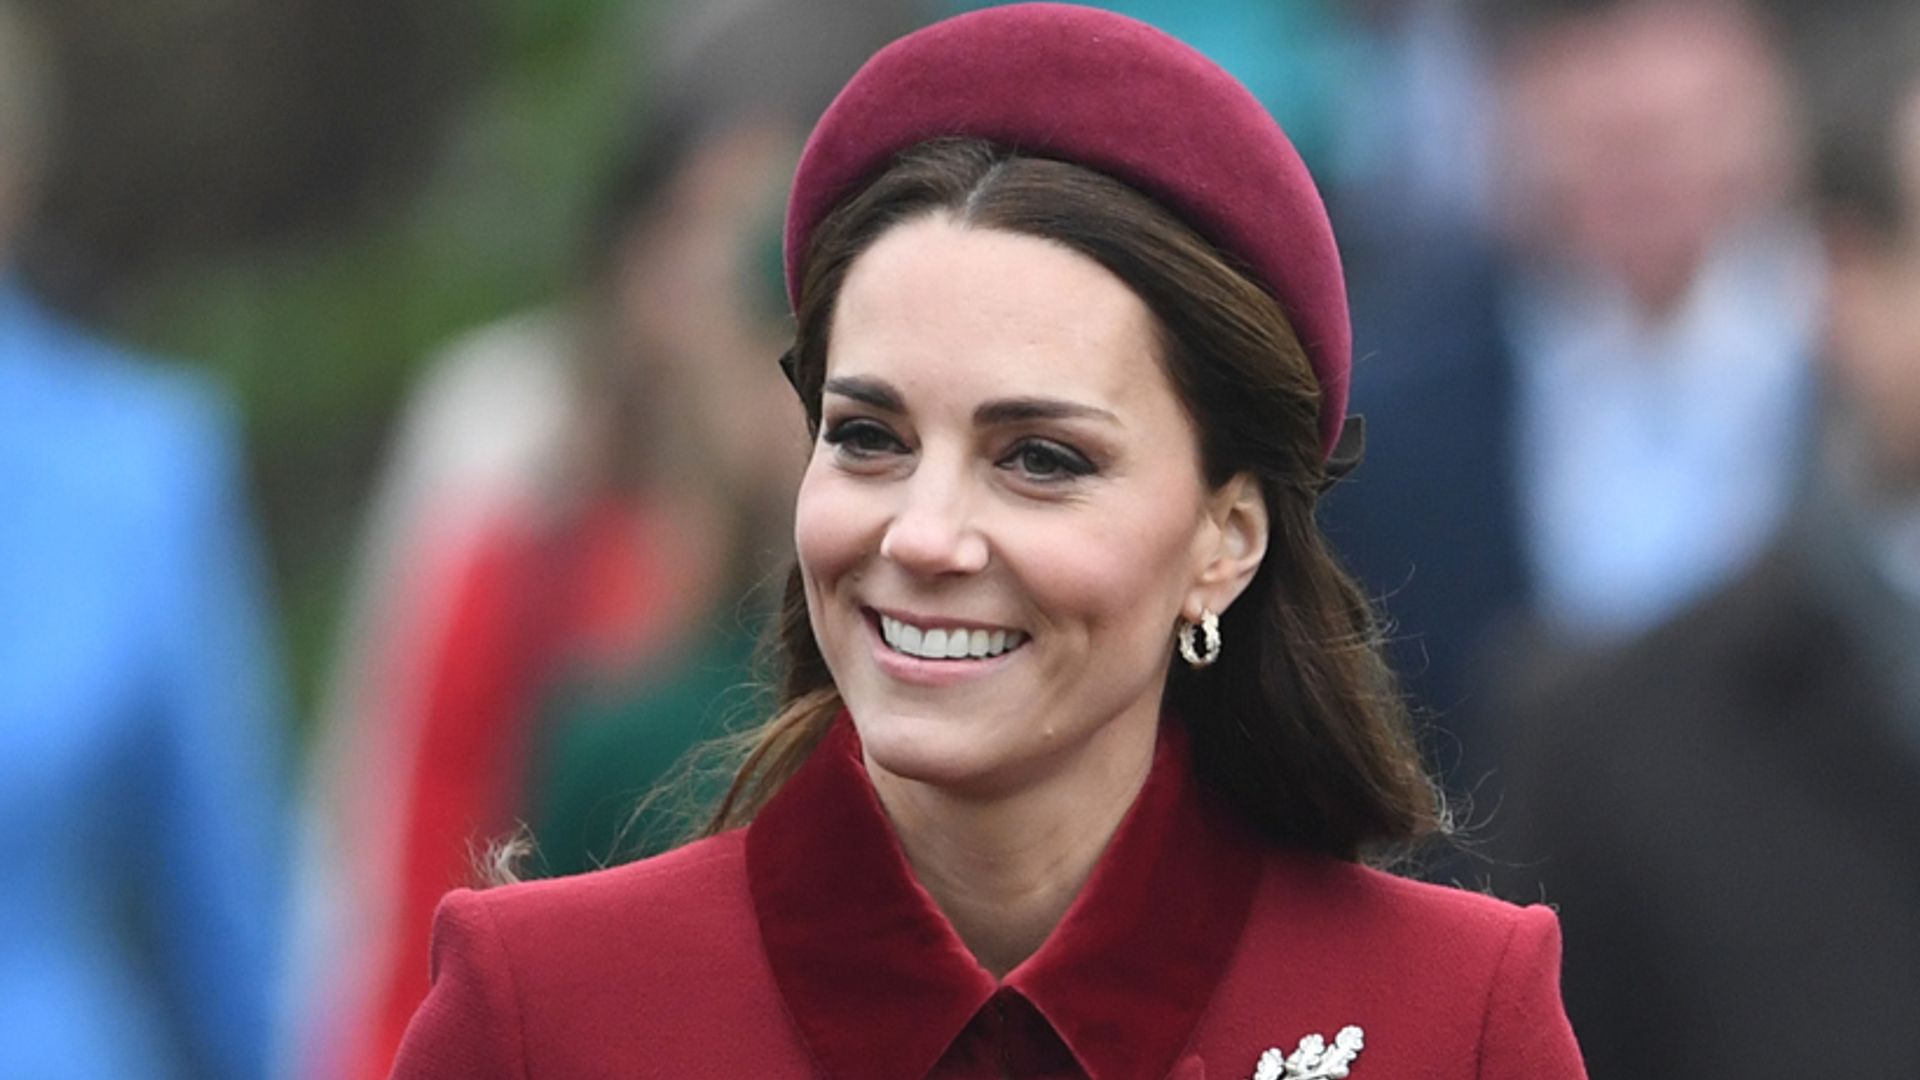 Kate Middleton dresses up for Christmas Day with the royal family | HELLO!